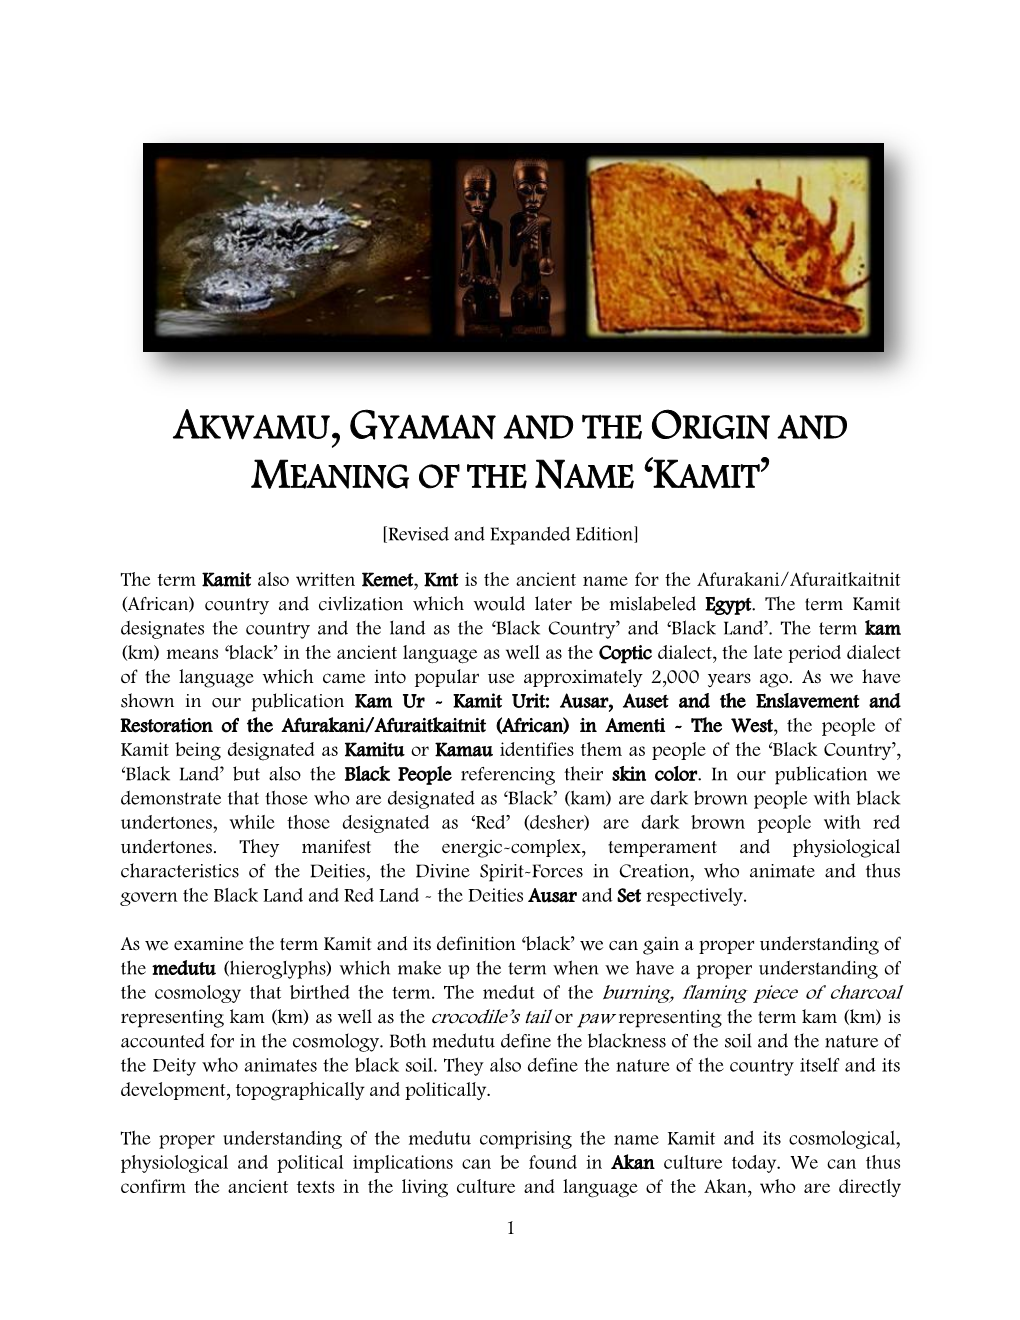 Akwamu, Gyaman and the Origin and Meaning of the Name ‘Kamit’